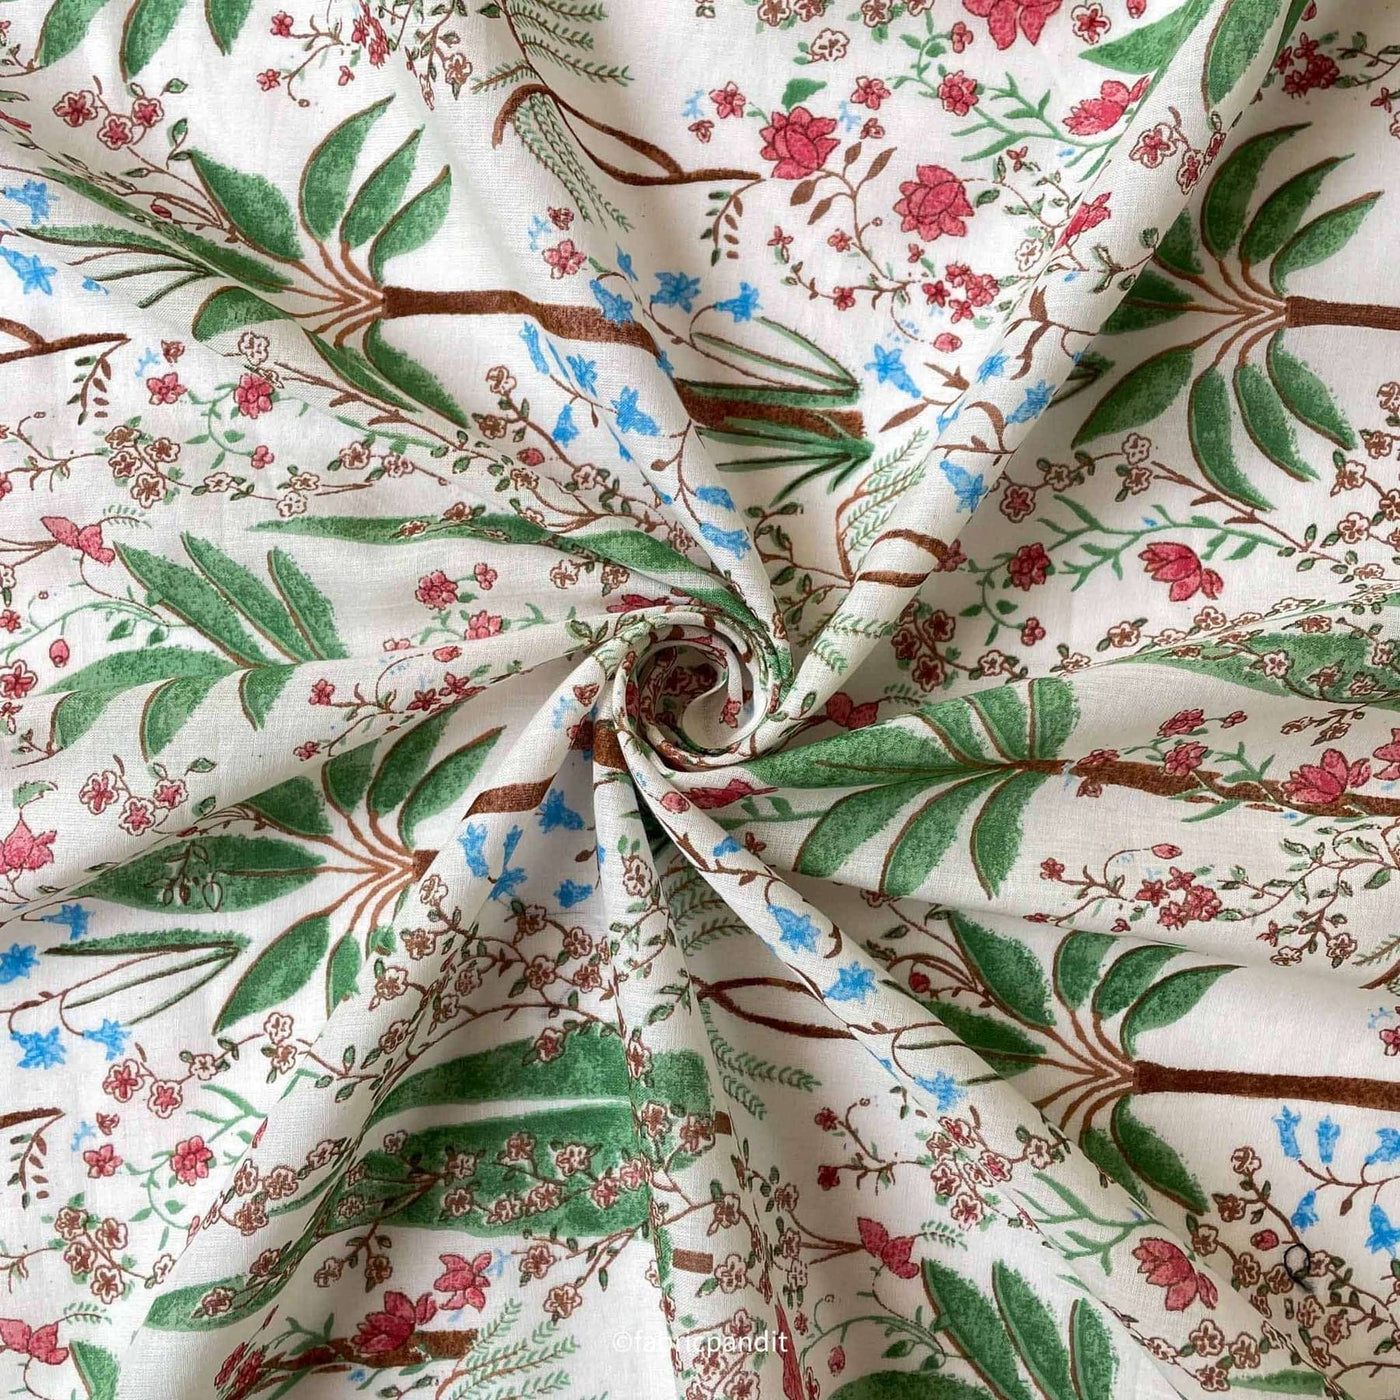 Fabric Pandit Fabric Fresh Green and Pink The Calm of Oasis Hand Block Printed Pure Mul Cotton Fabric (Width 44 Inches)